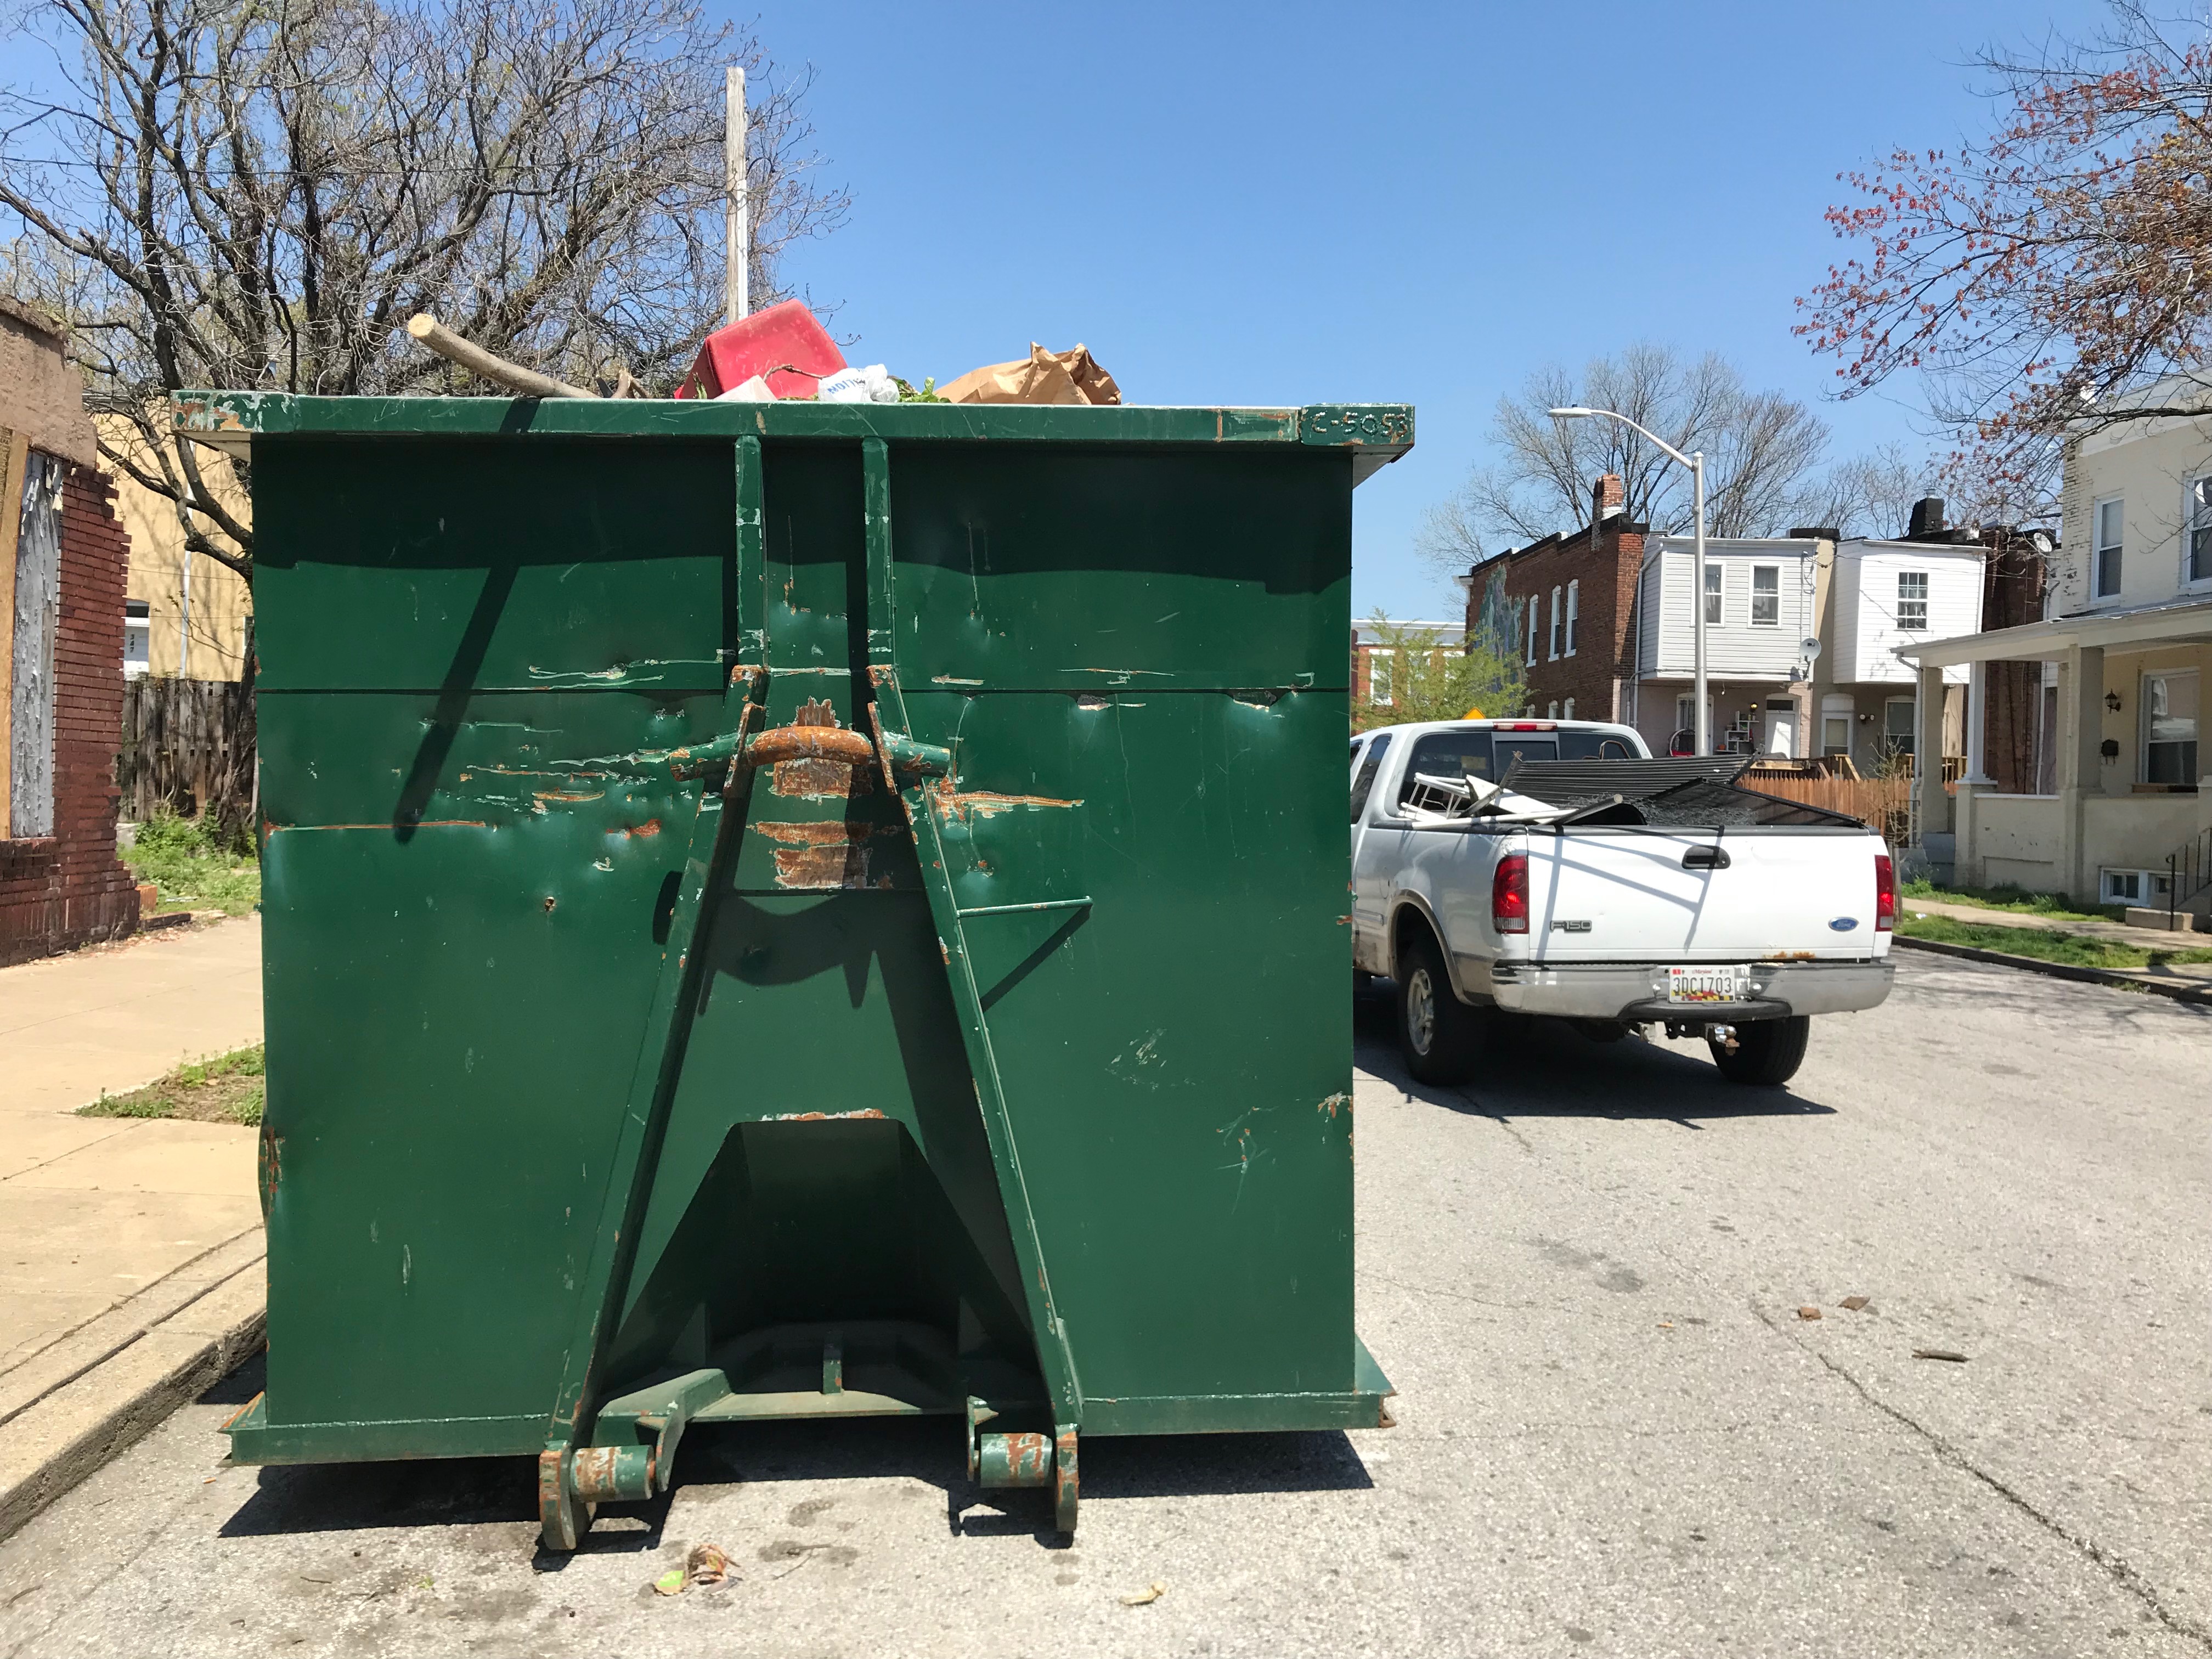 Dumpster, barclay street and e. 27th street (northwest corner), baltimore, md 21218 photo